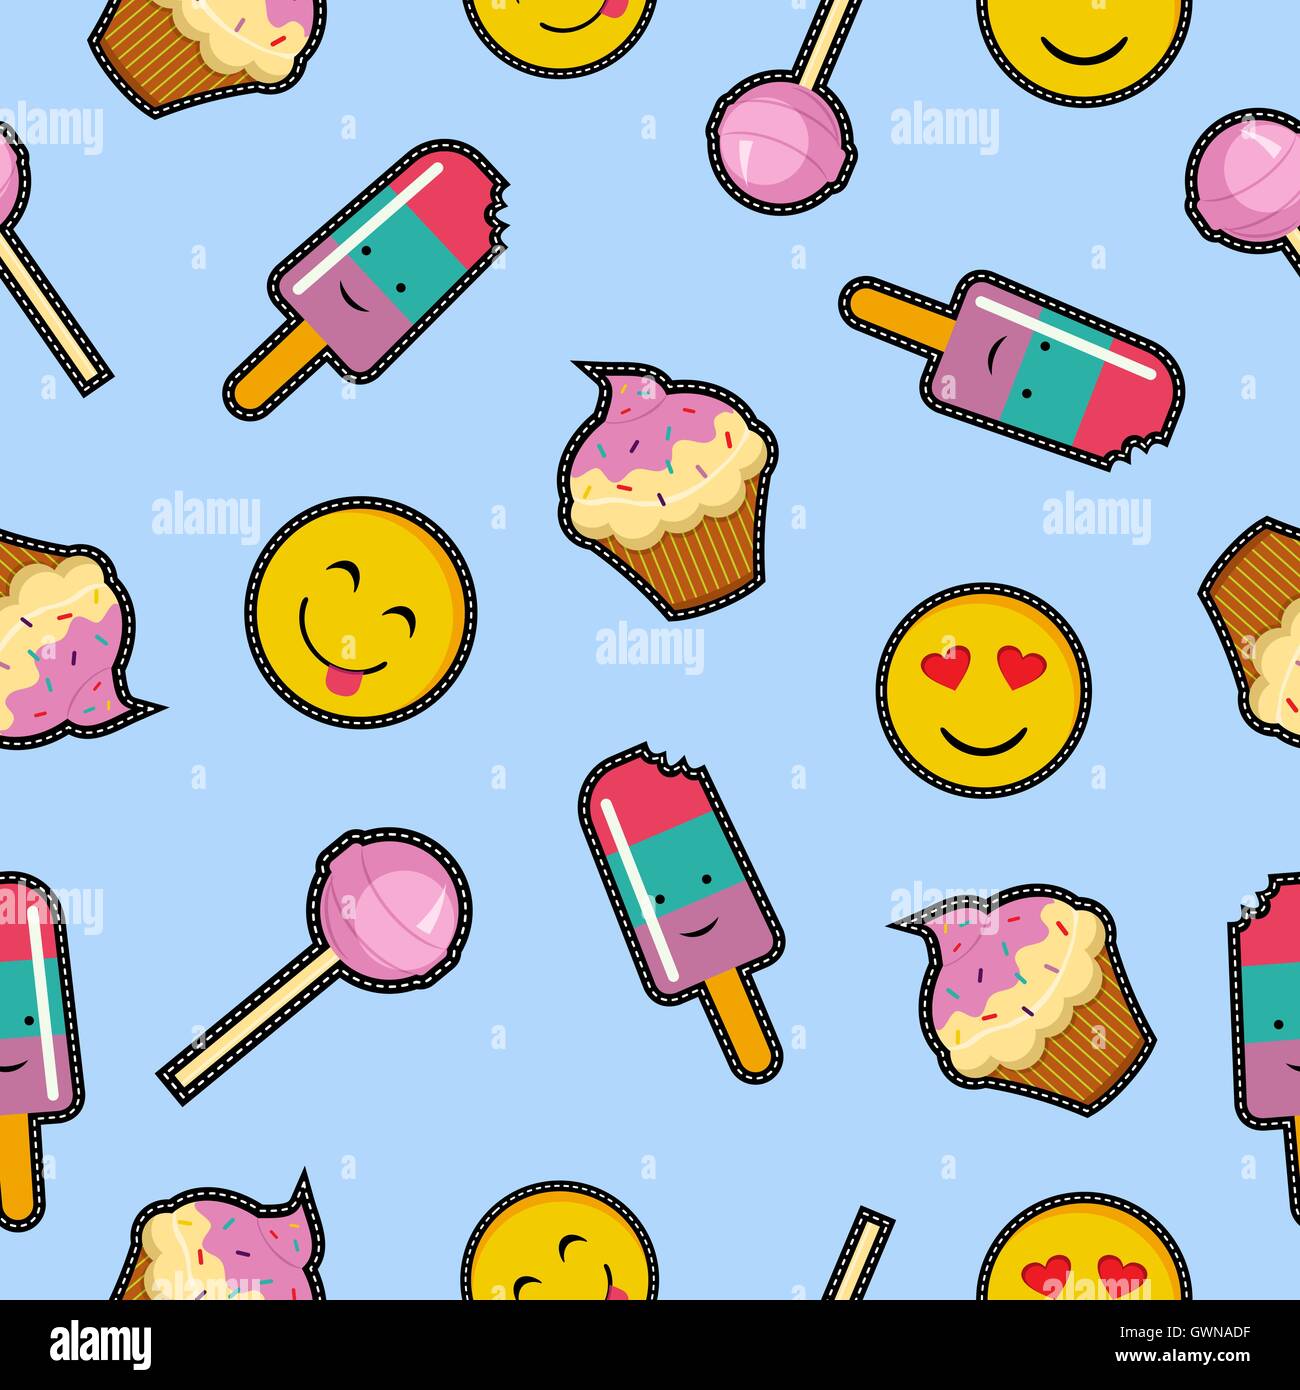 Cute seamless pattern with cartoon food decoration, emoji, dessert and candy illustrations. EPS10 vector. Stock Vector